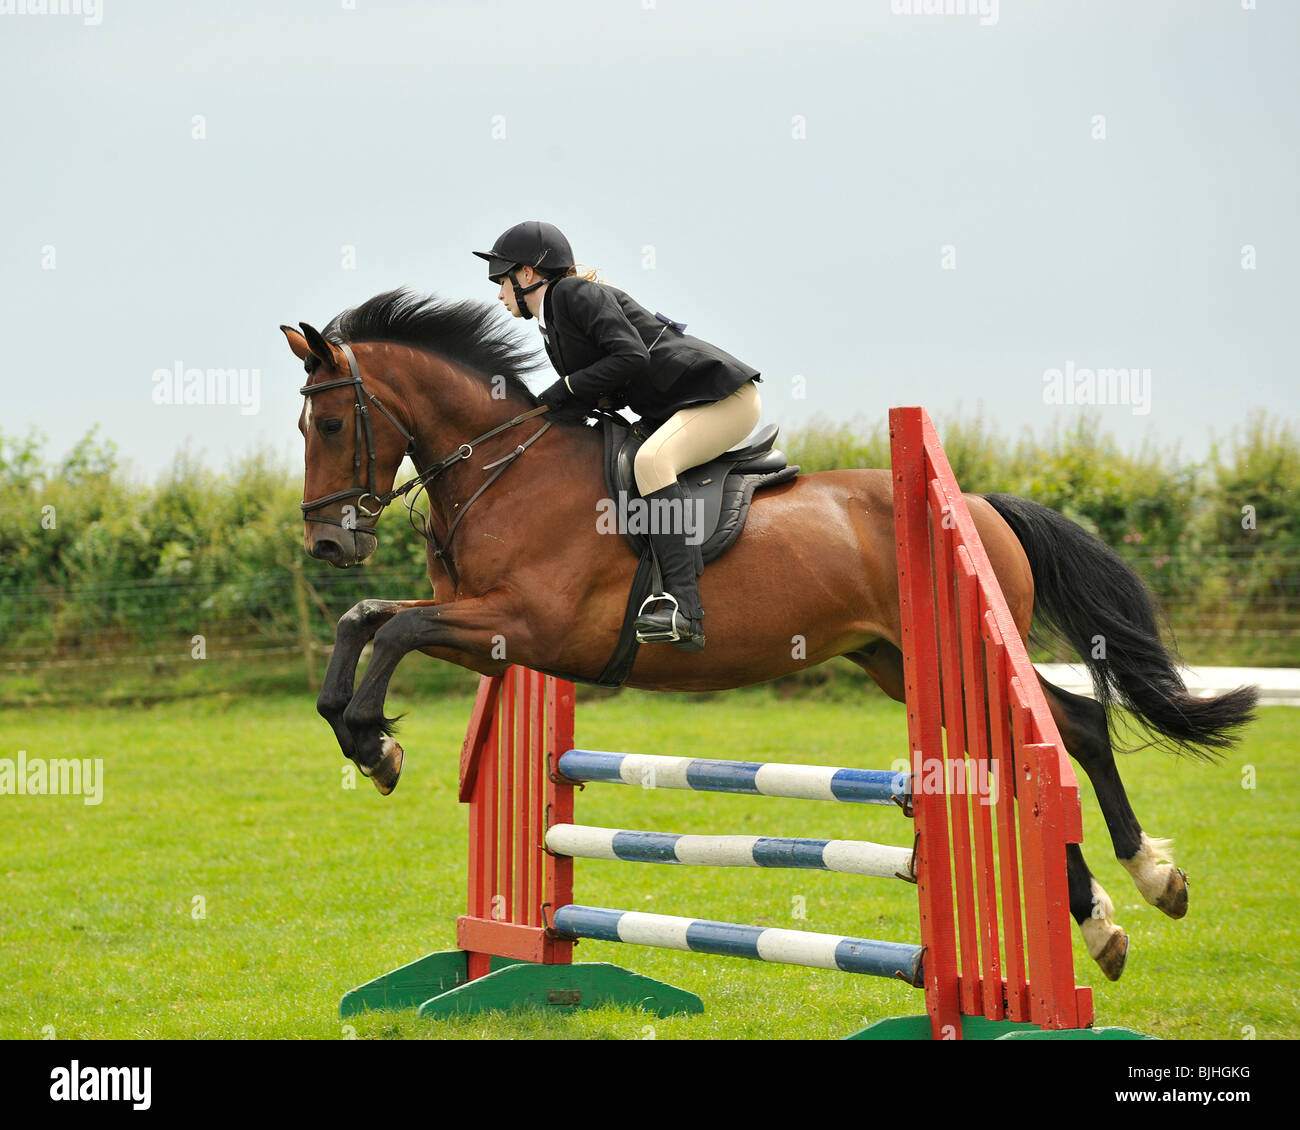 show jumping horse Stock Photo